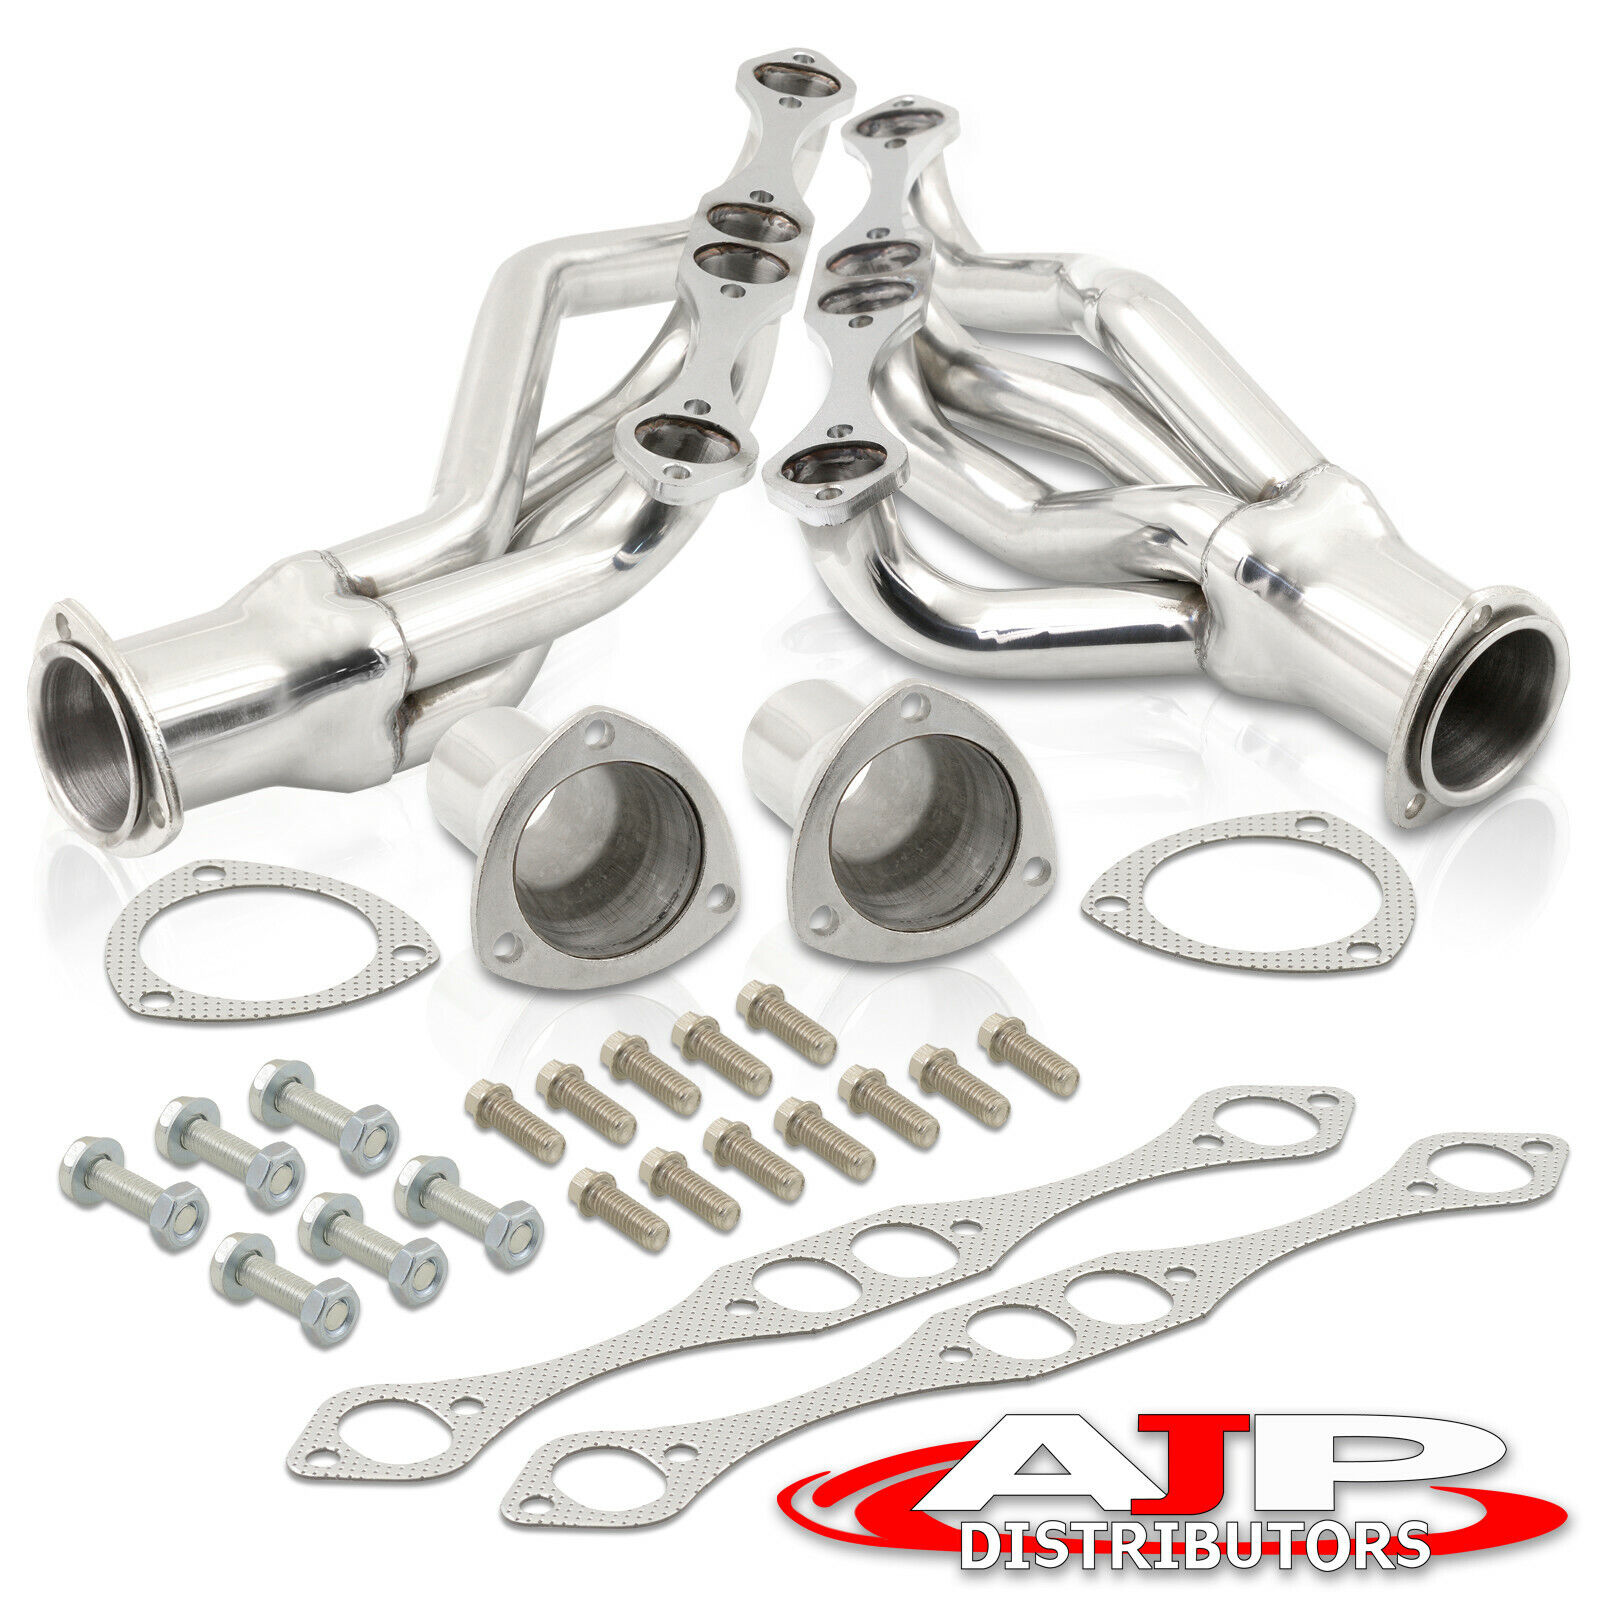 Stainless Steel Exhaust Shorty Headers For Chevy Small Block 265 305 327 350 400